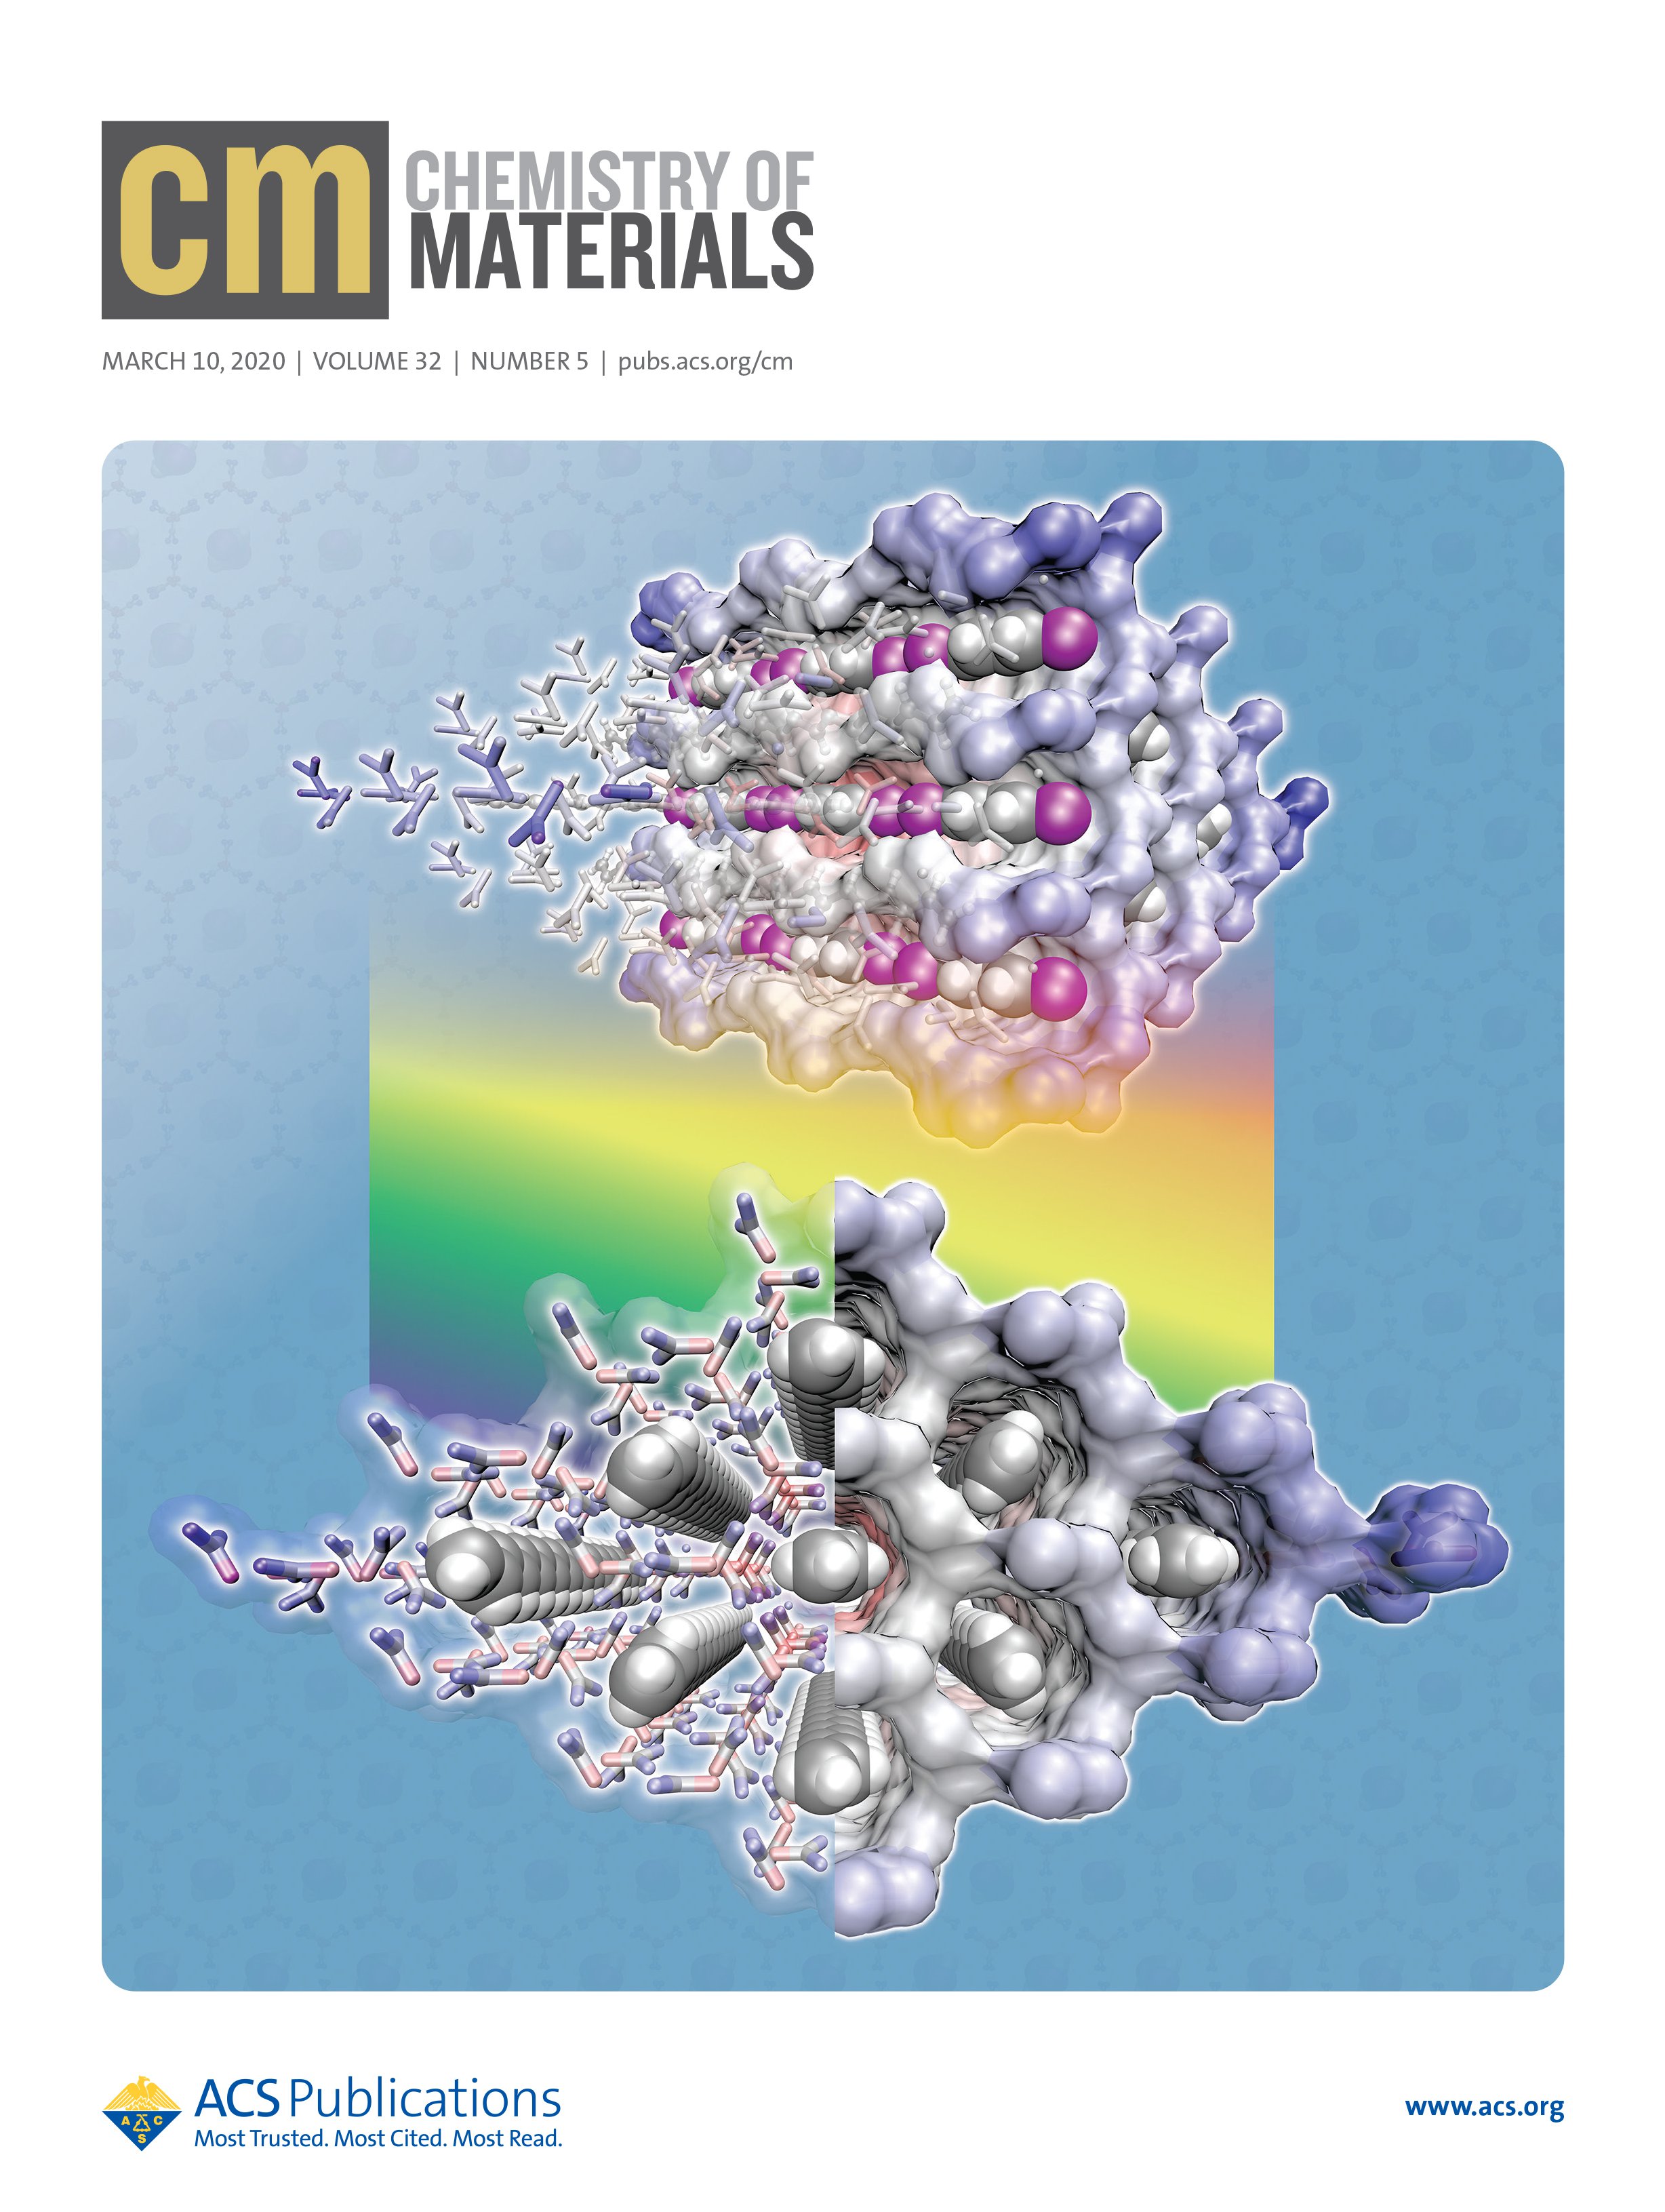 March 2020 Issue of Chemistry of Materials